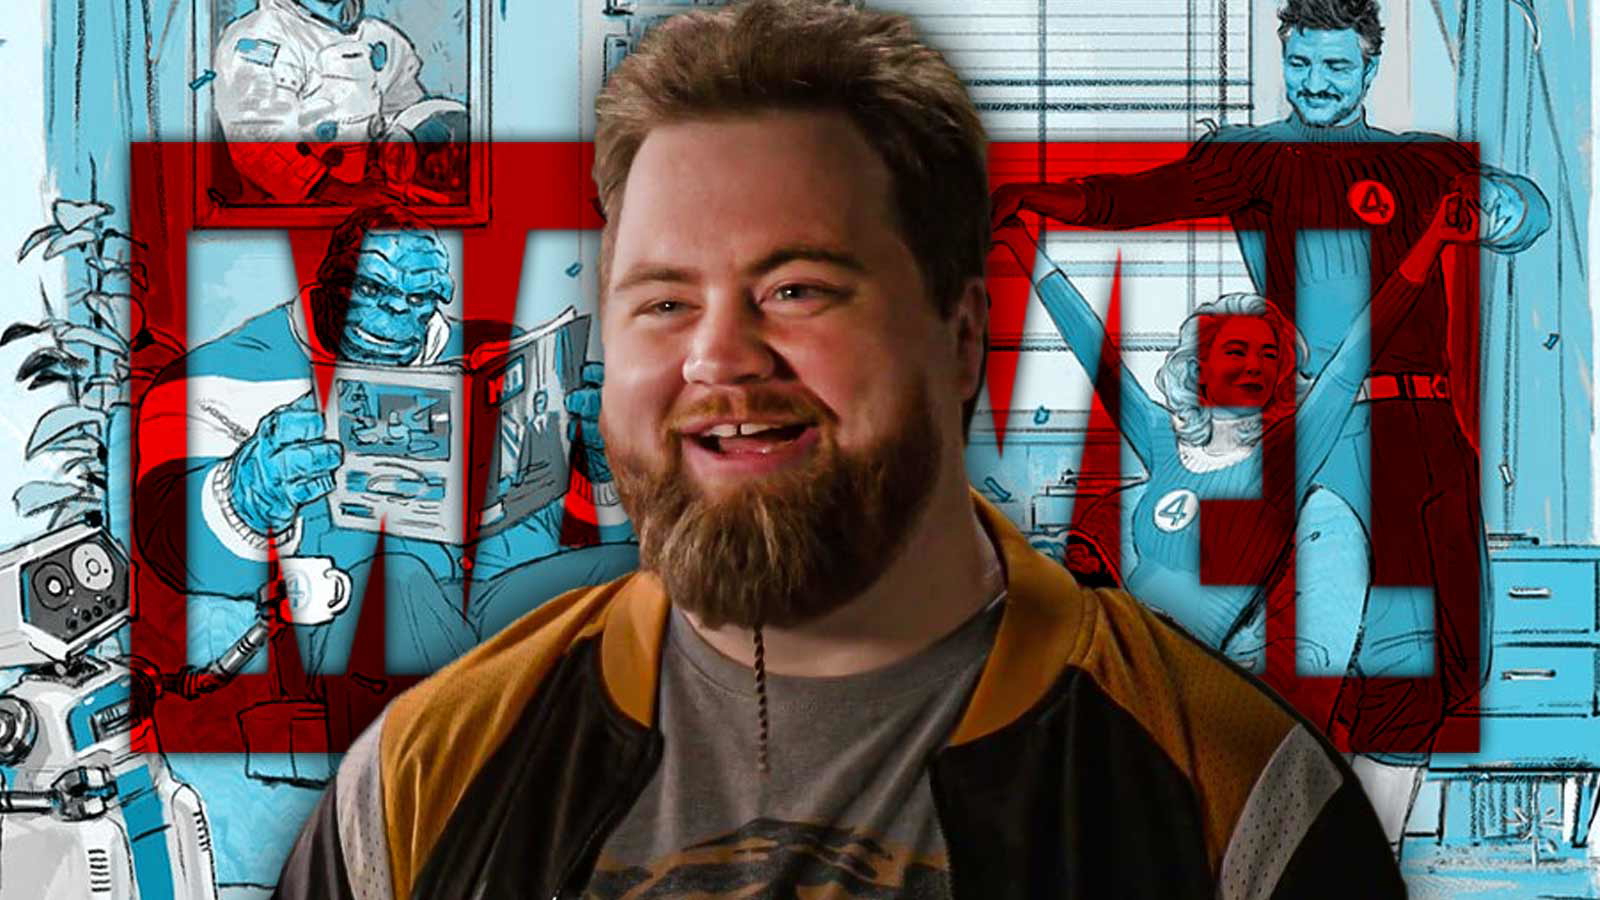 “I appreciate his enthusiasm”: Paul Walter Hauser’s Preparation For His ‘Fantastic Four’ Role is a Huge Green Flag For the MCU Film